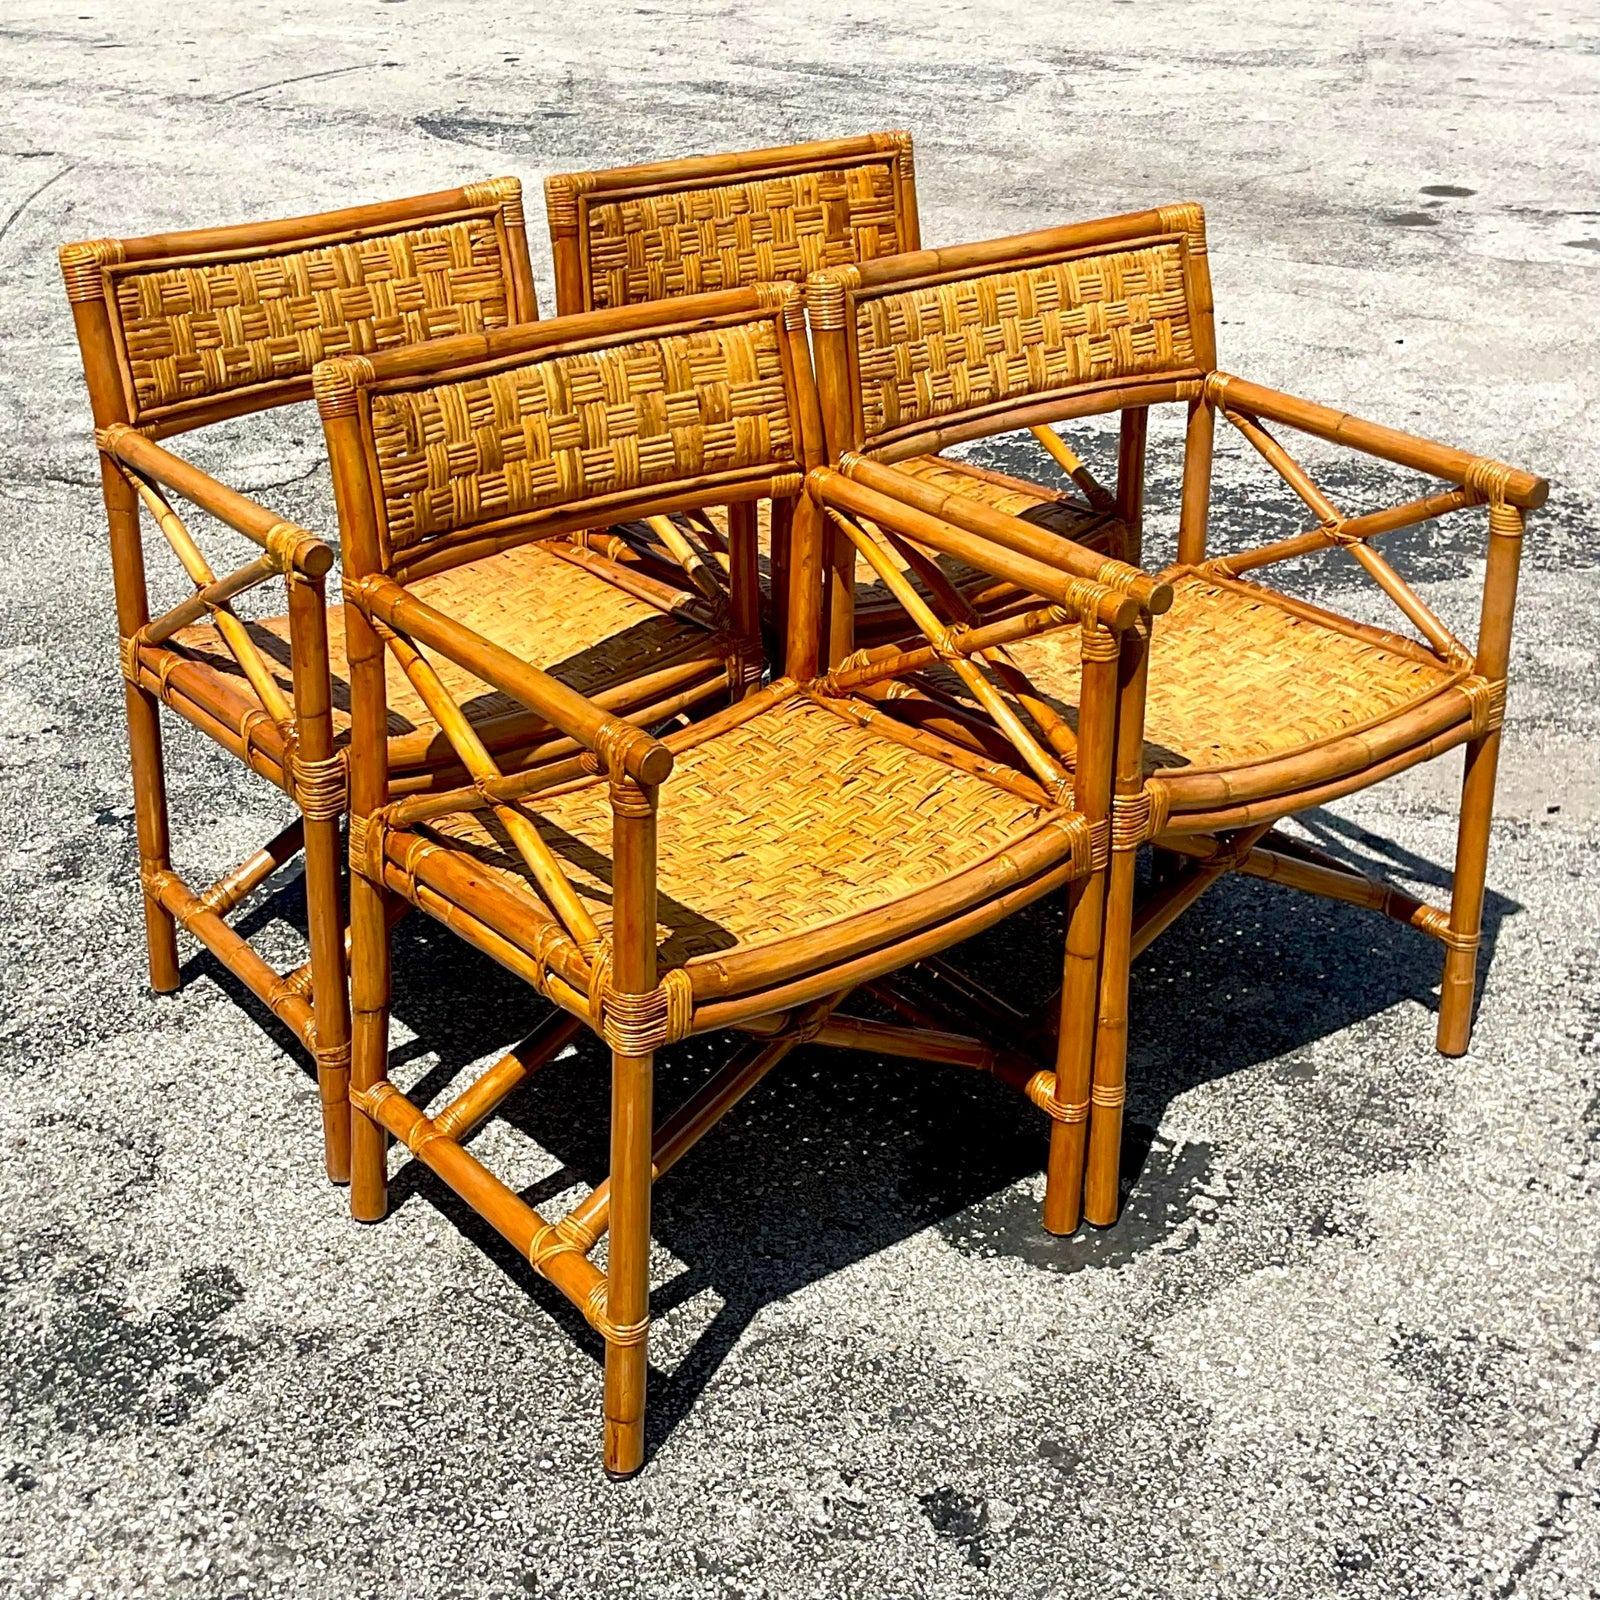 A fabulous set of four vintage Coastal dining chairs. A chic Directors style chair in woven rattan. Acquired from a Palm Beach estate.